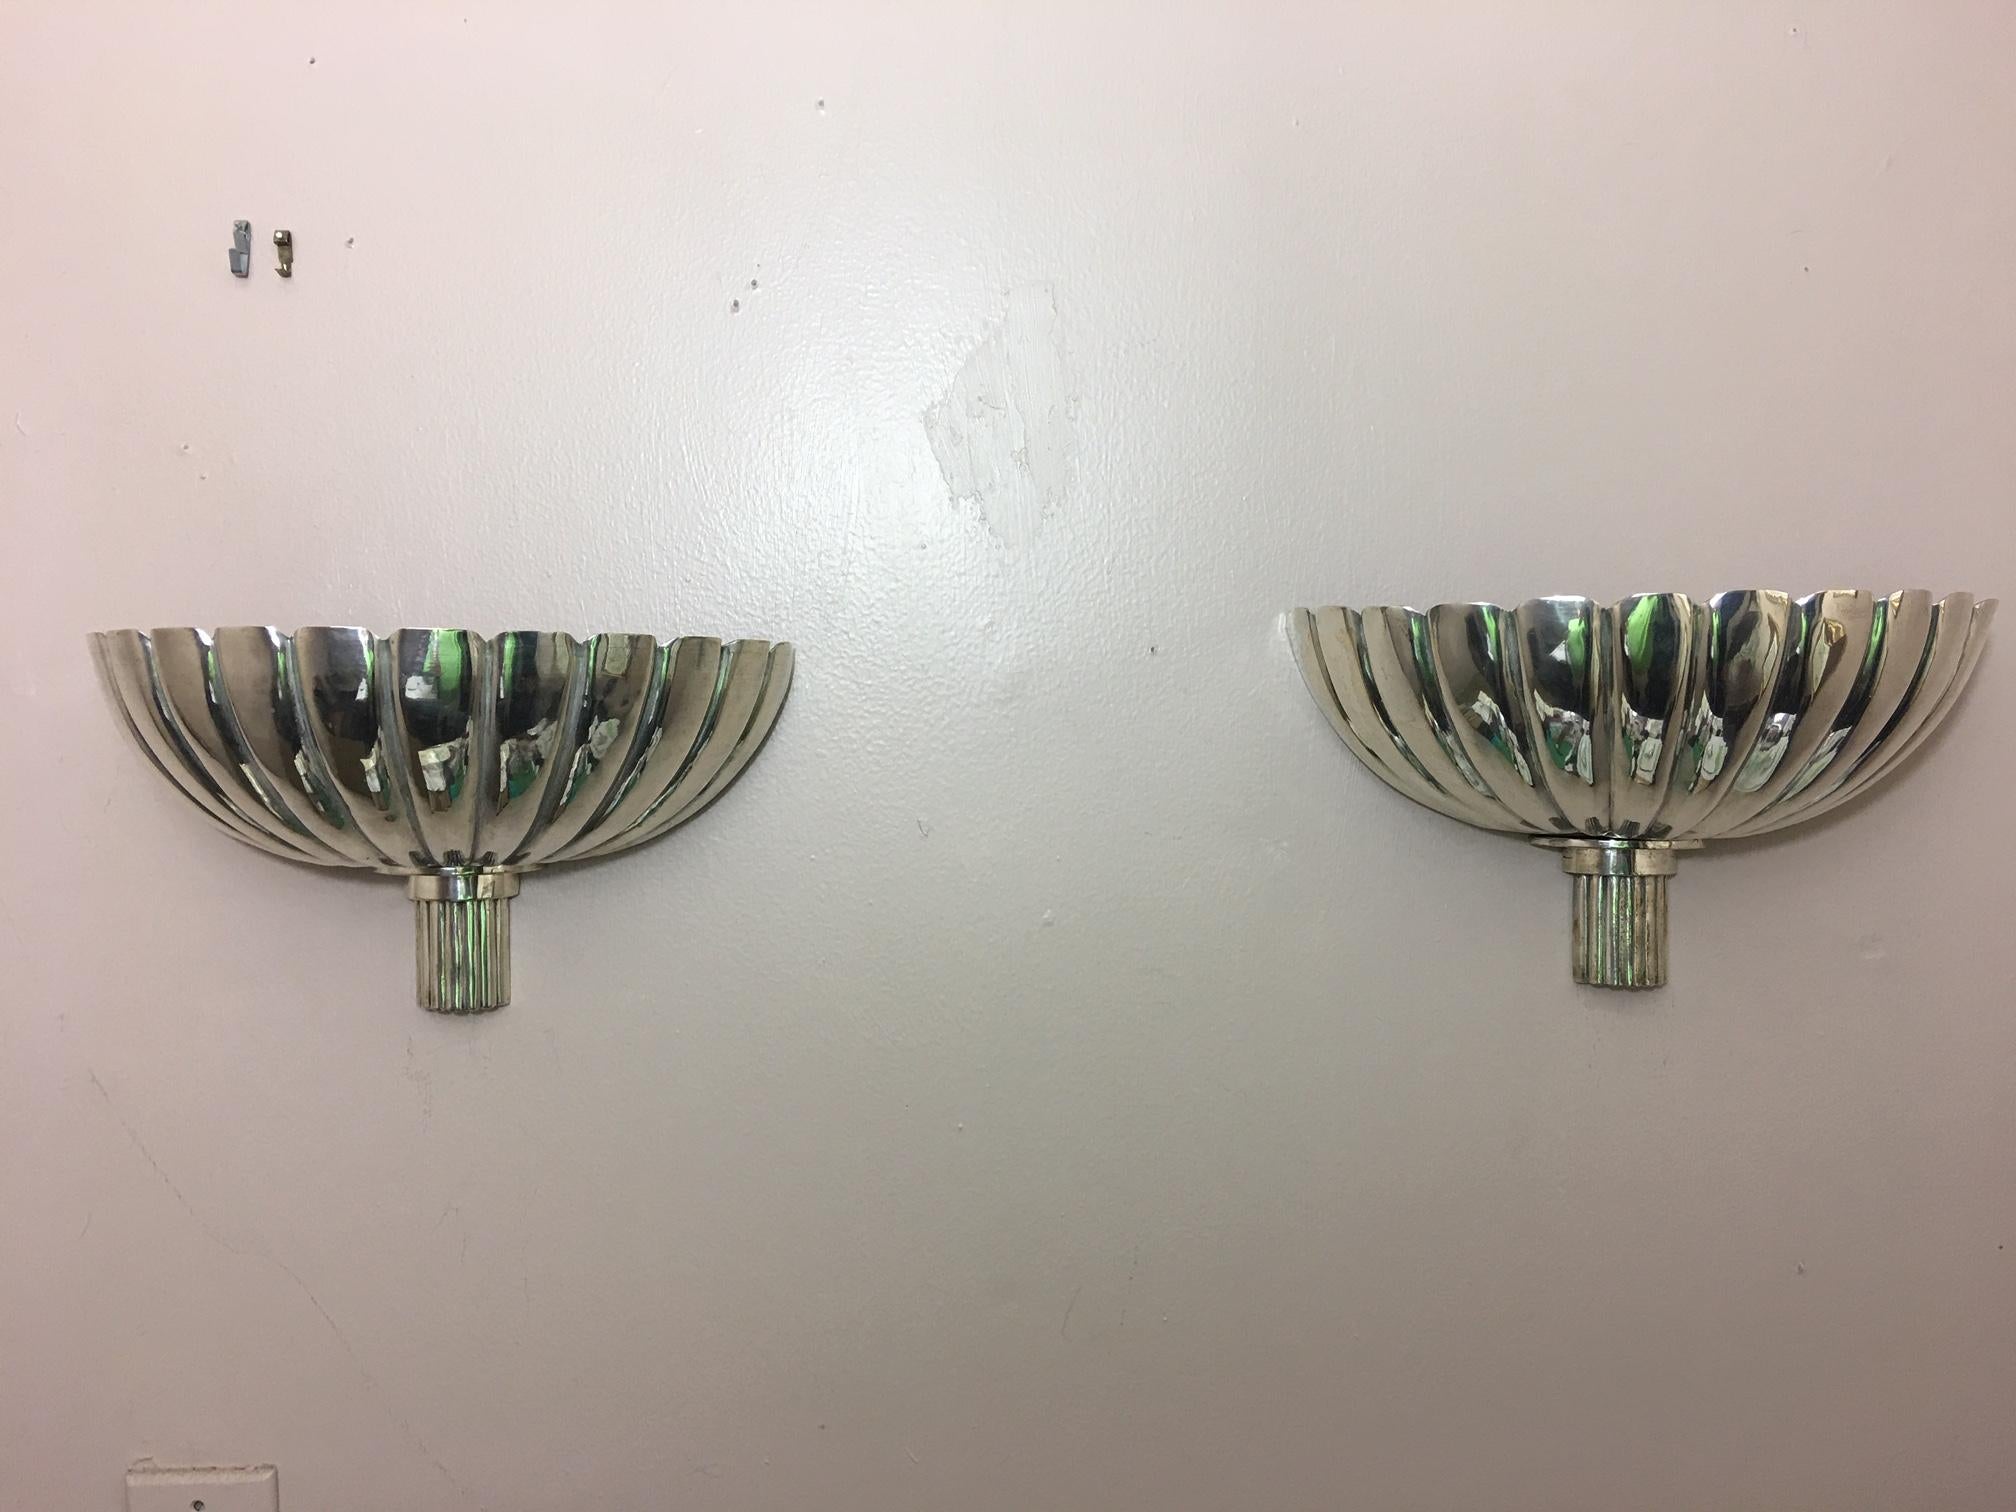 Pair of French Art Deco silver wall sconces, mid-20th century.